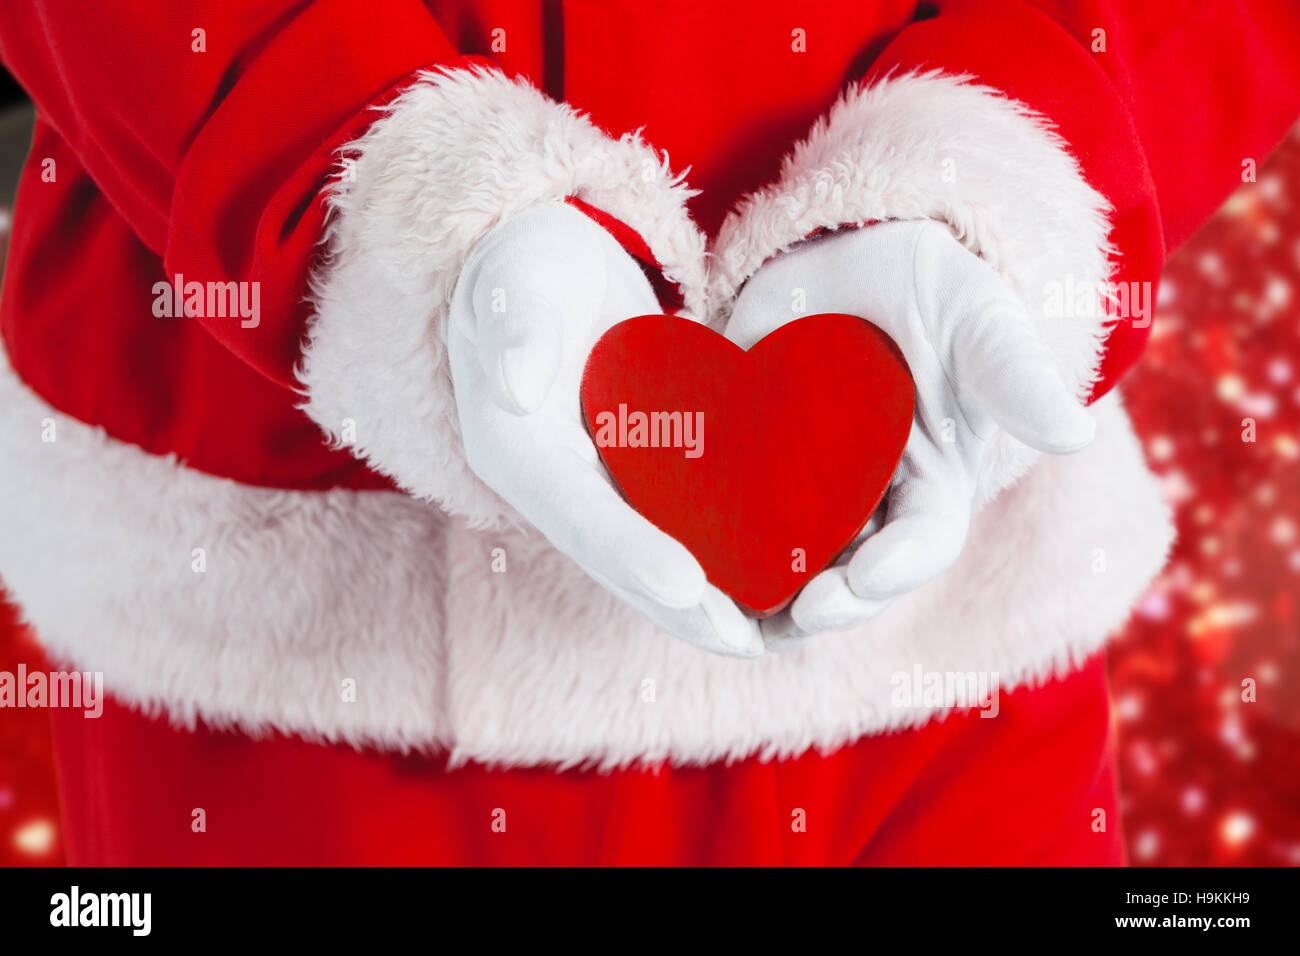 Composite image of santa claus showing red heart shape Stock Photo